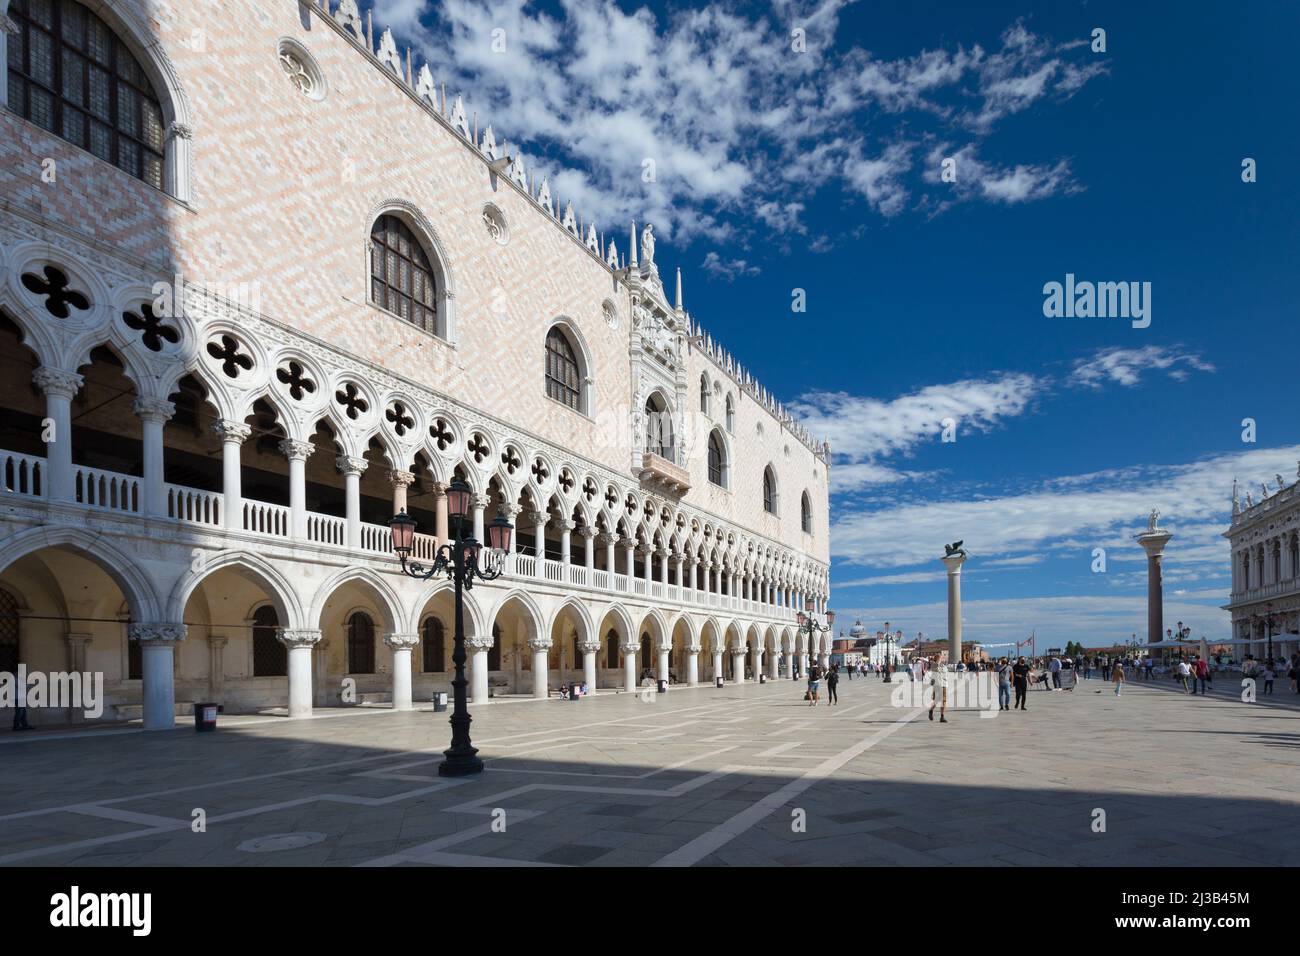 San Marco square and the Doge's palace, Venice, Italy Stock Photo